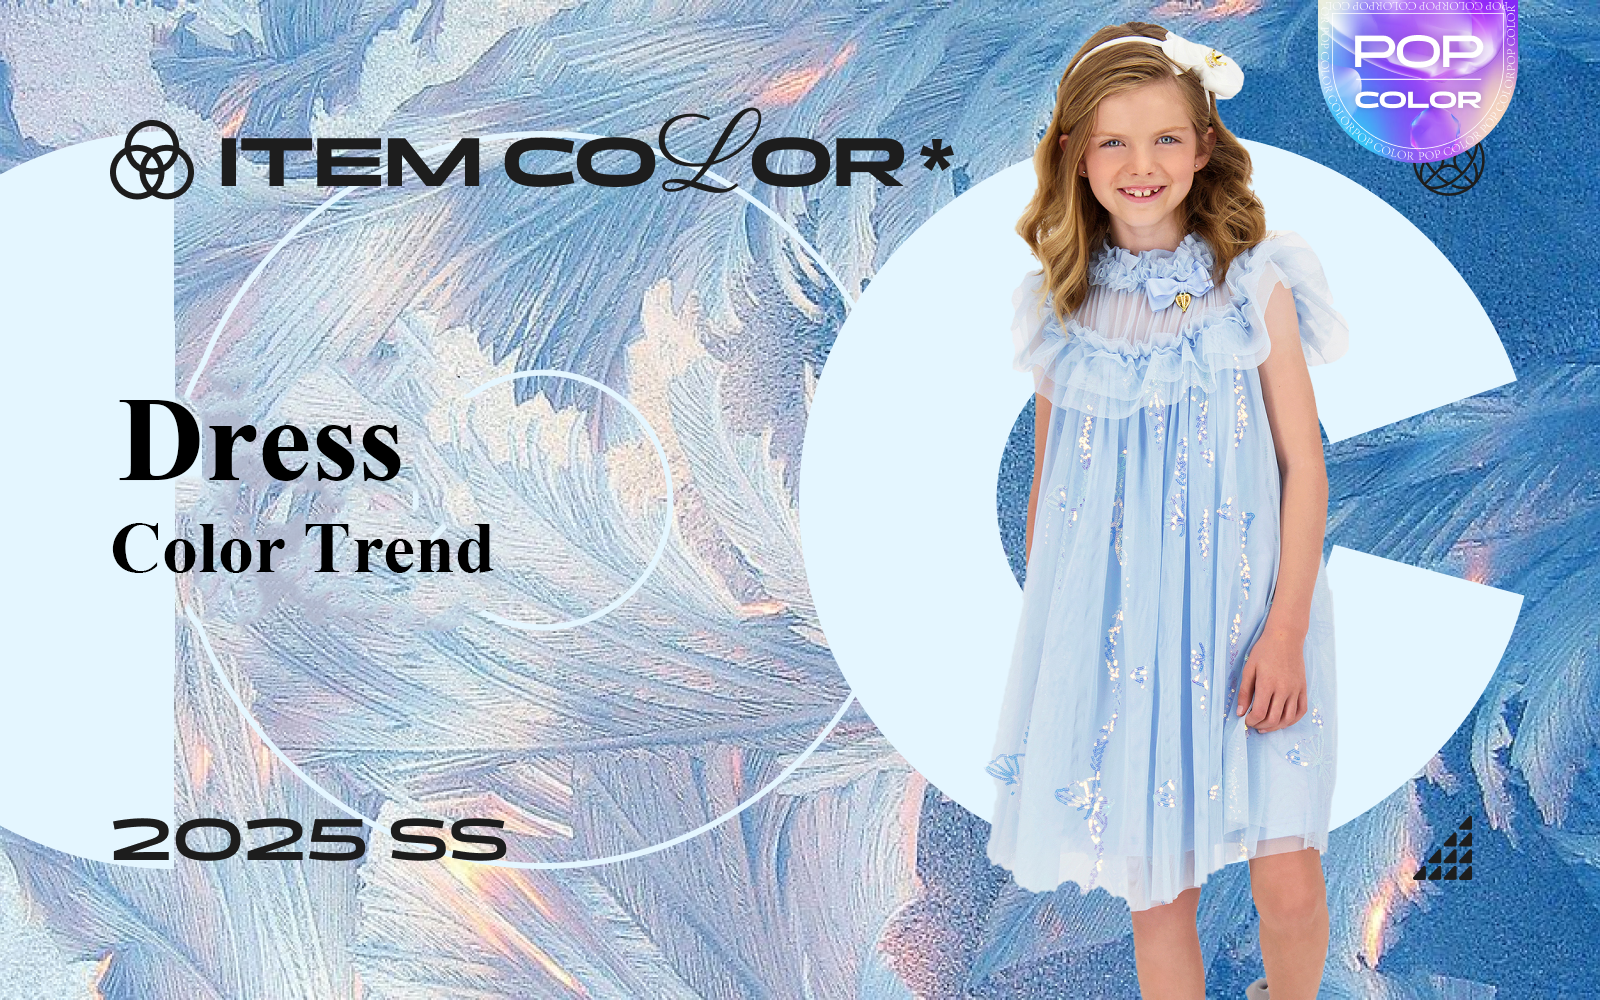 Dress -- The Color Trend for Kidswear